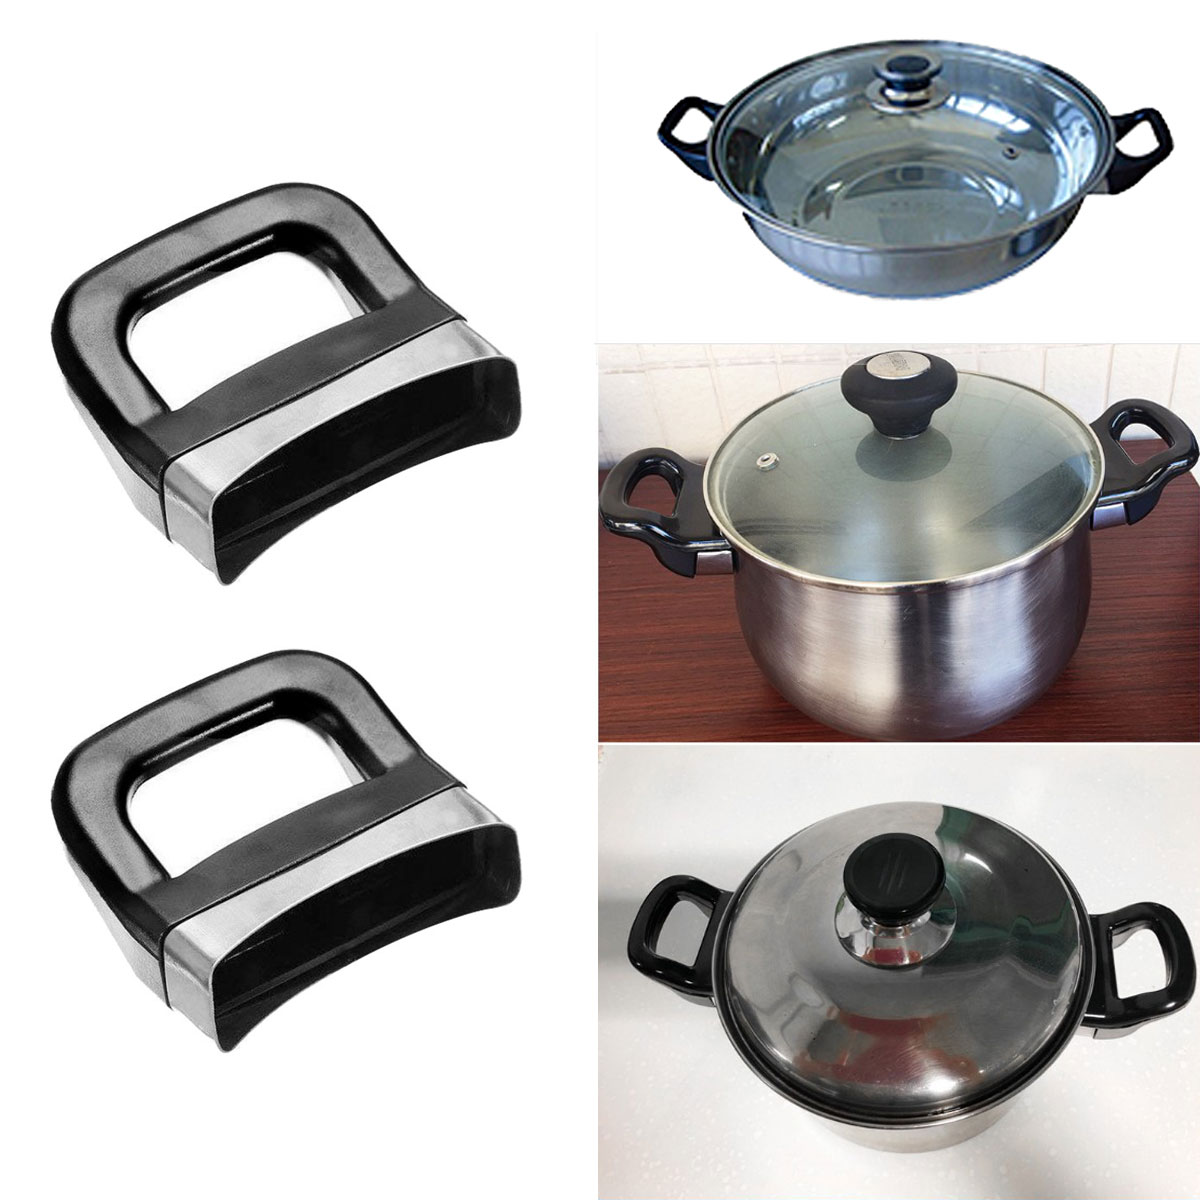 2Pcs Cooking Pot Handles for Pans Pressure Cooker Steamer Bakelite Pot Ear  Replacement Potty Side Handle Kitchen Accessories - Price history & Review, AliExpress Seller - iEFiEL HomeFree Store